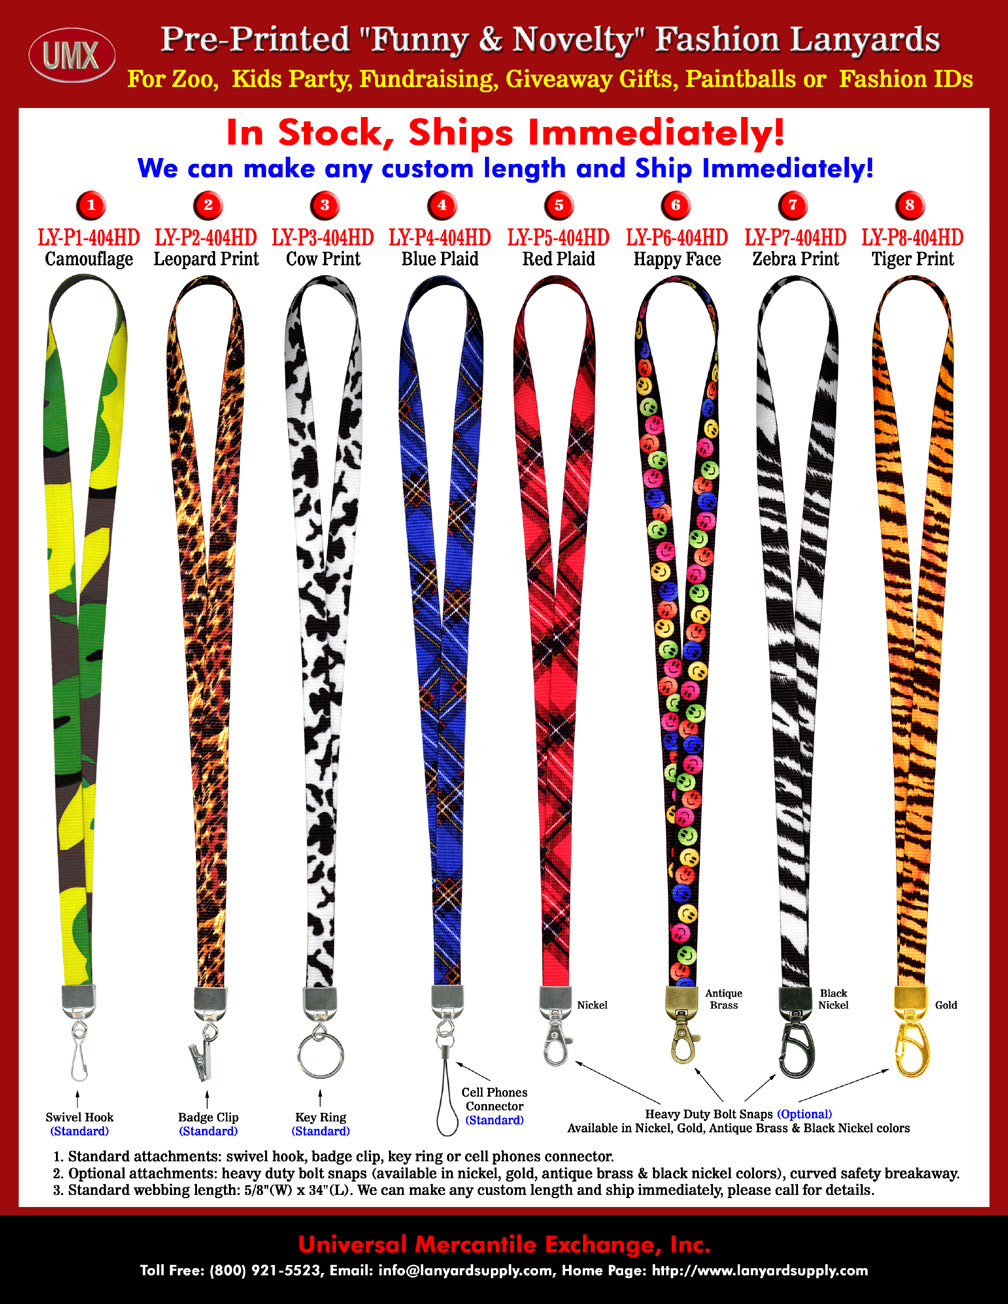 The MP3 lanyards or MP3 carrying straps are unique designs for carrying MP3, CD or digital music players. MP3 lanyards come with a variety of eye catching pre-printed themes or color patterns.